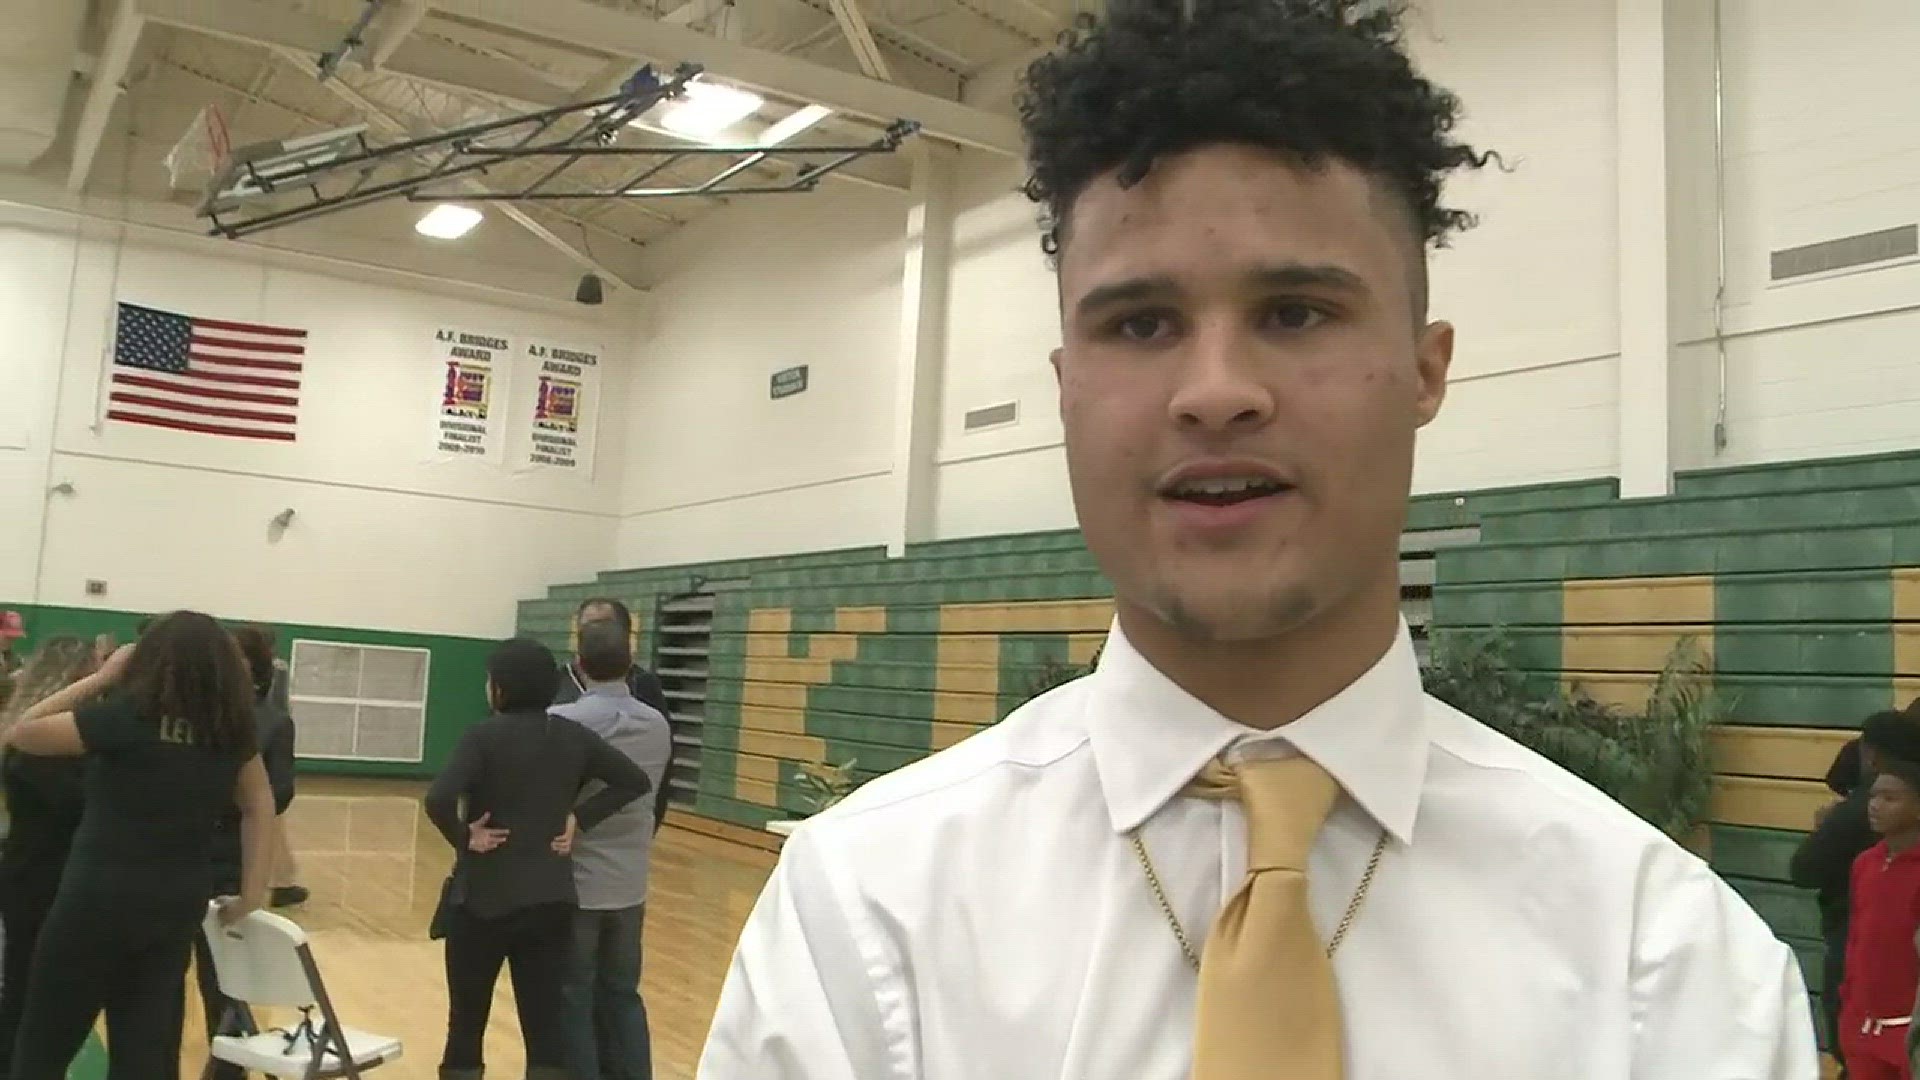 Wide receiver DaShon Bussell details his decision to sign with WMU, and memories from his one year at Knoxville Catholic.